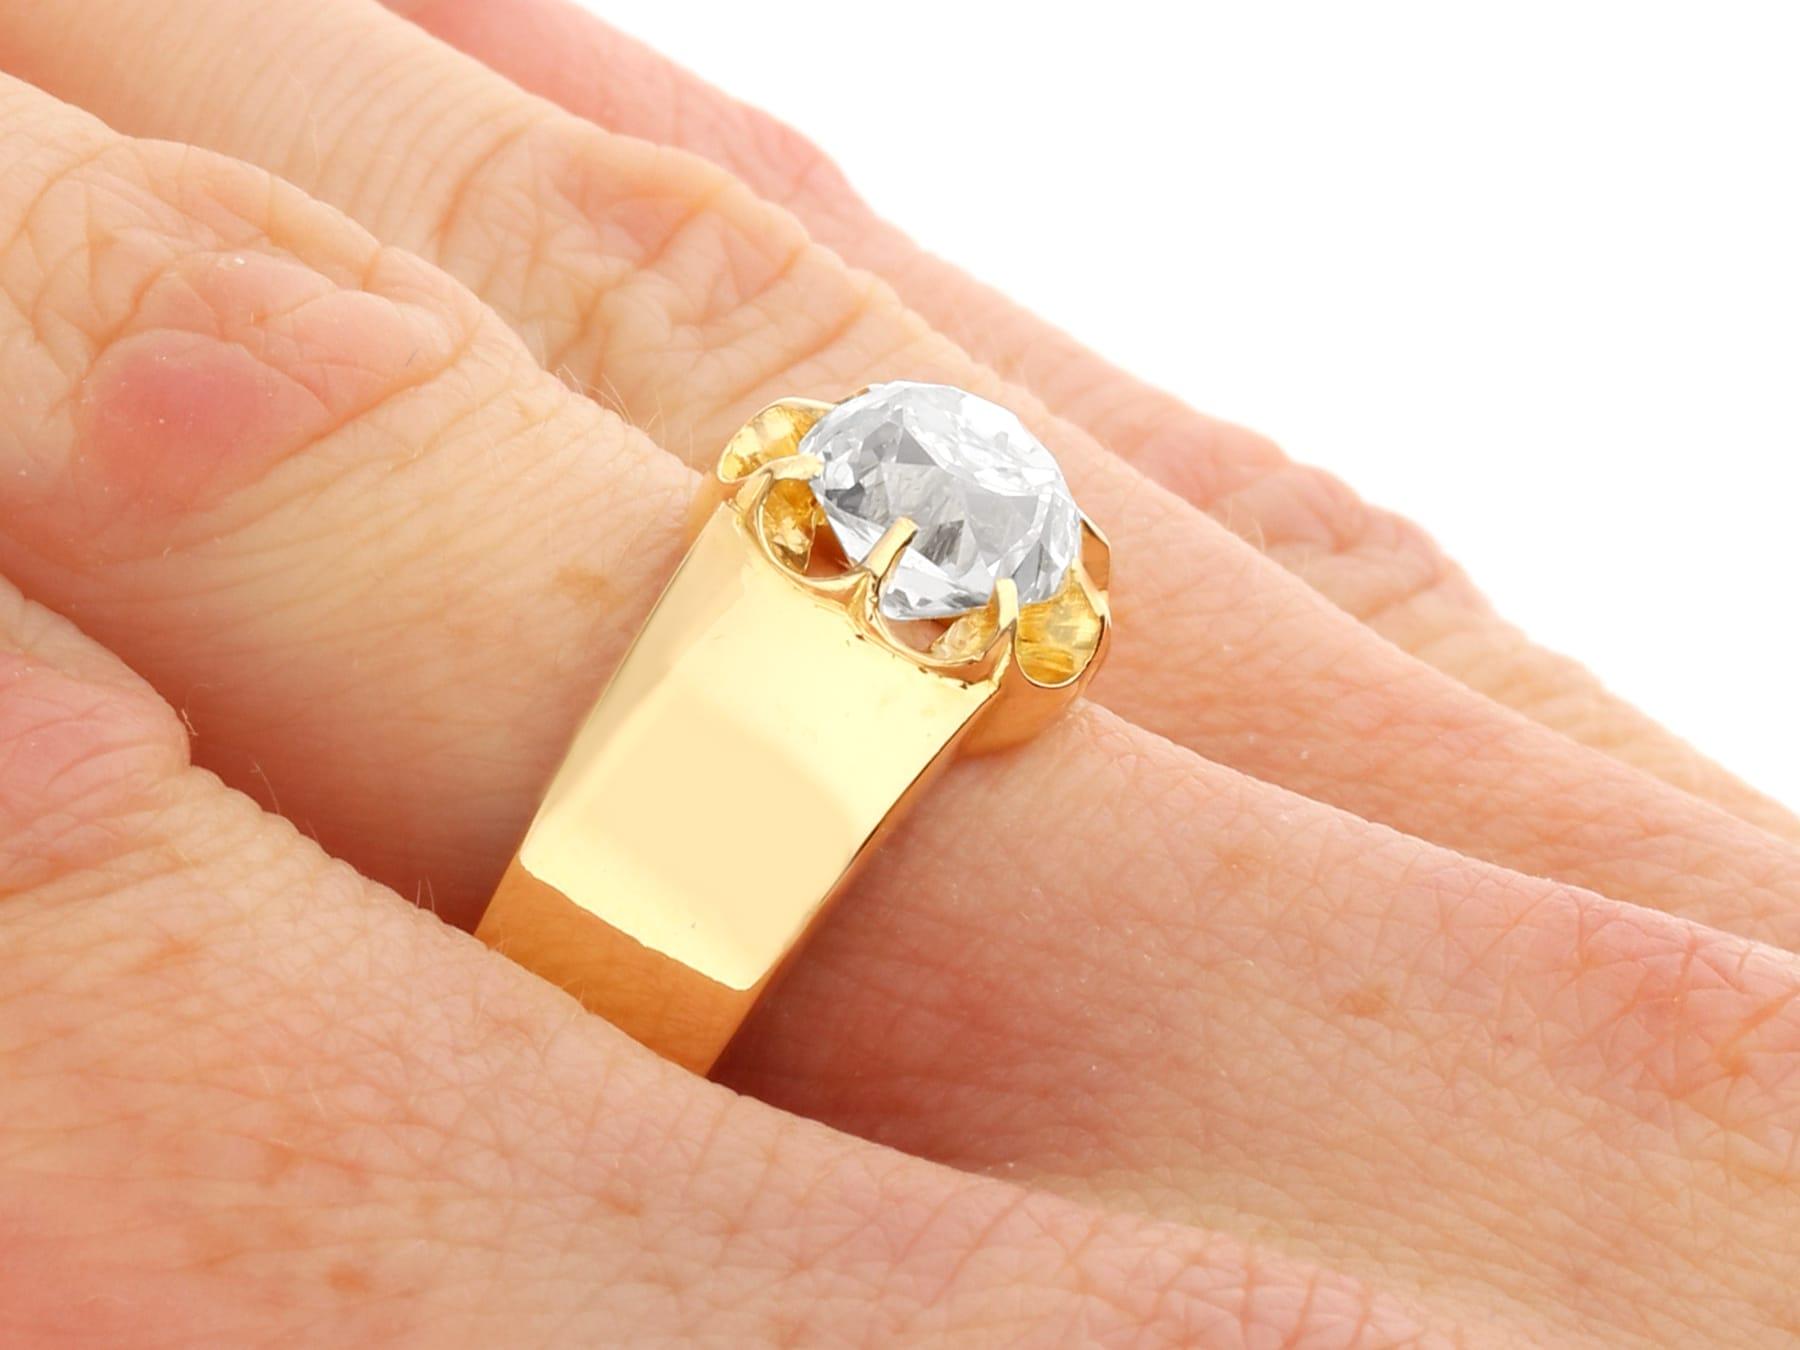 Antique 2.38 carat Diamond and 18k Yellow Gold Unisex Solitaire Ring For Sale 5